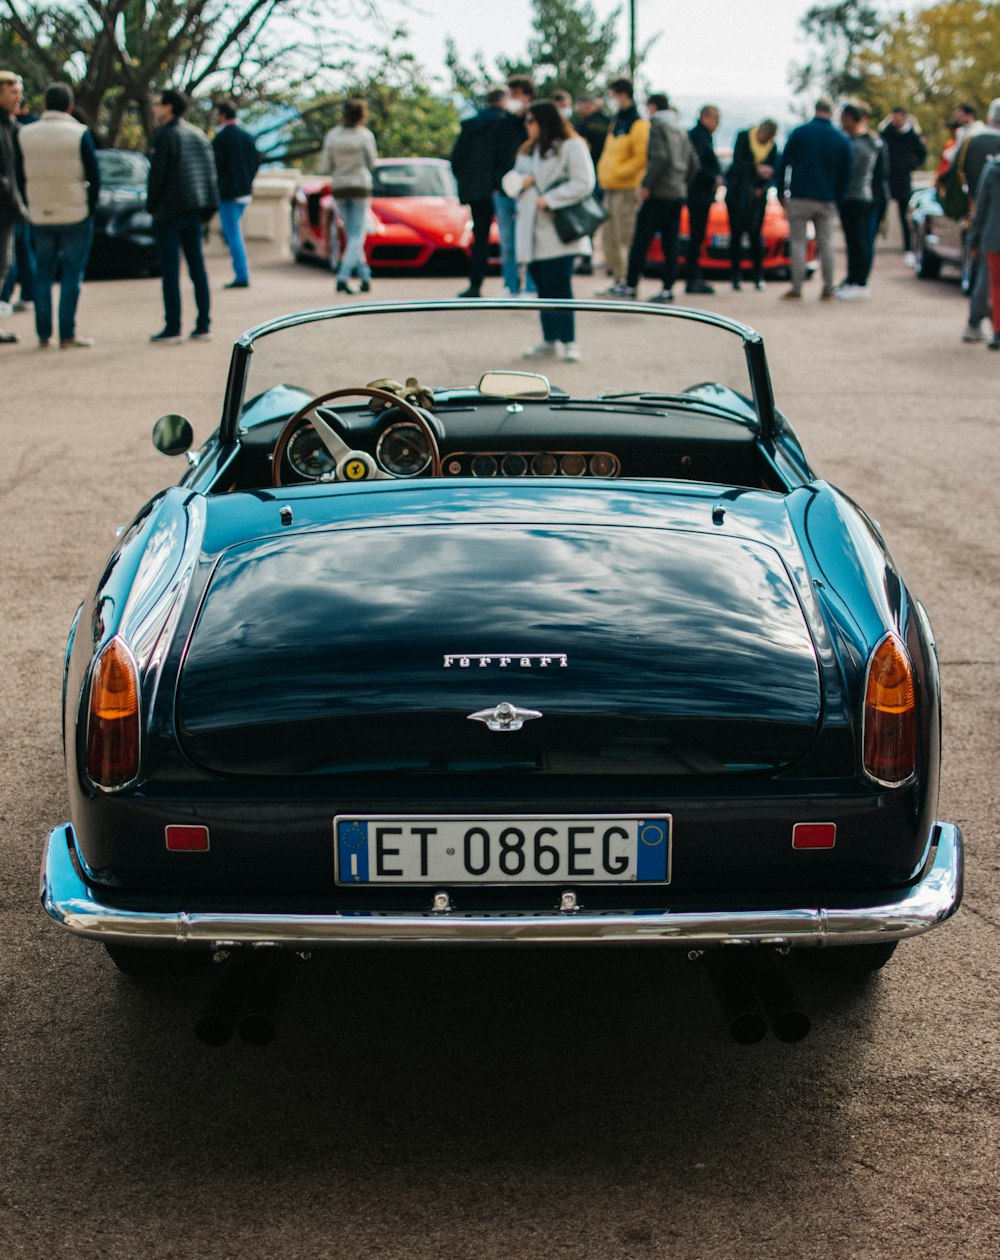 A blue sports car parked in a parking lot photo – Free California Image on  Unsplash